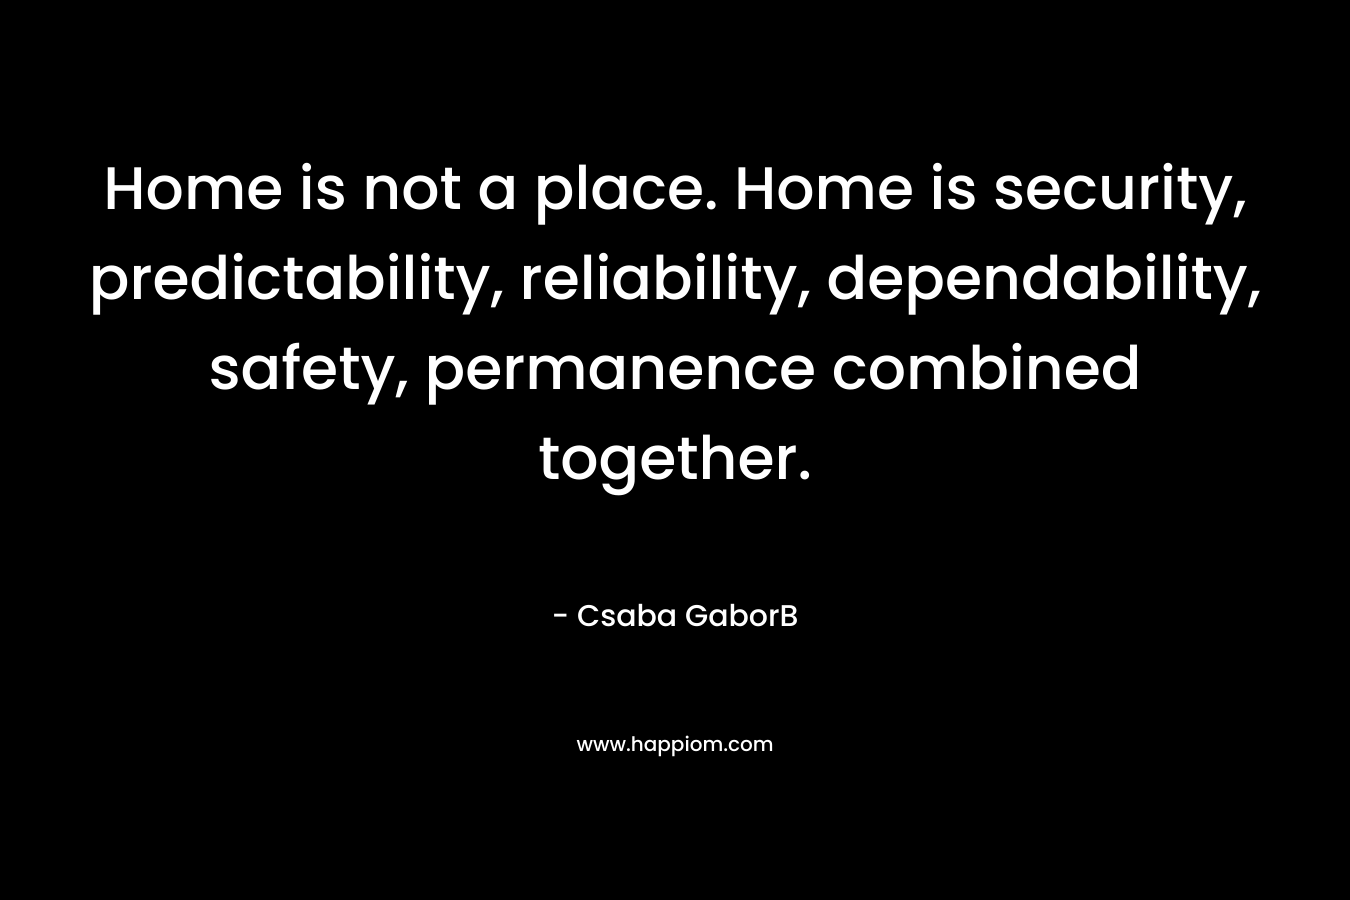 Home is not a place. Home is security, predictability, reliability, dependability, safety, permanence combined together.  – Csaba GaborB